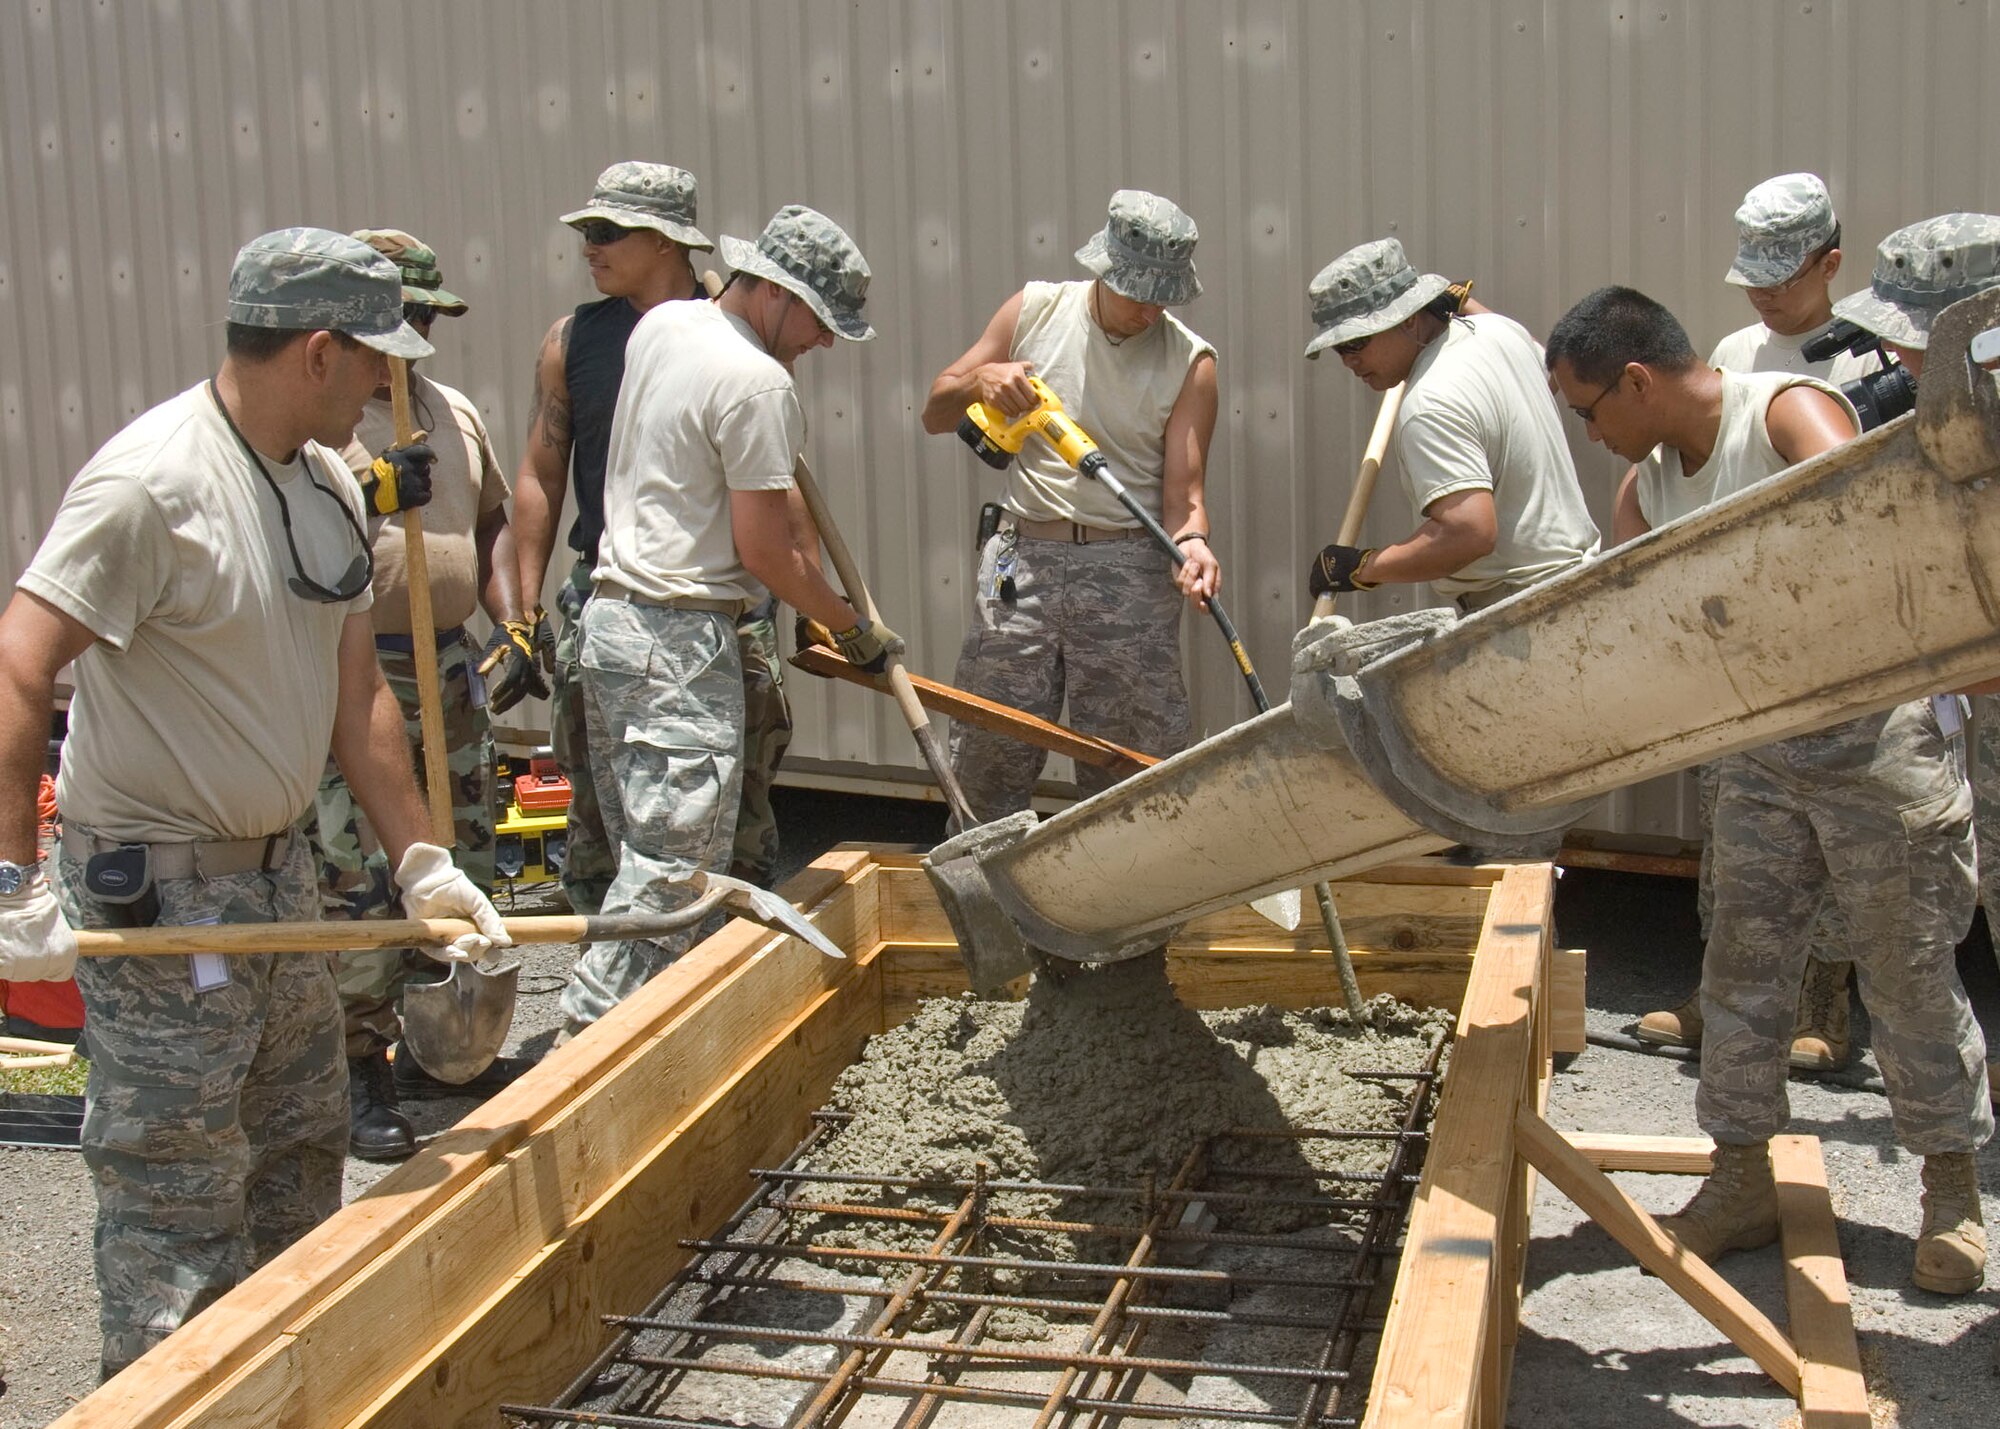 Airmen from the 146th Civil Engineering Squadron known as the “dirt boys” assist with a concrete pour on Pearl City’s Naval Base in Hawaii, June 14, 2010. The Civil Engineering Squadron is assisting with various construction projects at Pearl City Naval Base and U.S. Coast Guard Air Station, Barbers Point from June 4-18, 2010. (DoD photo by Airman 1st Class Nicholas Carzis, U.S. Air Force)